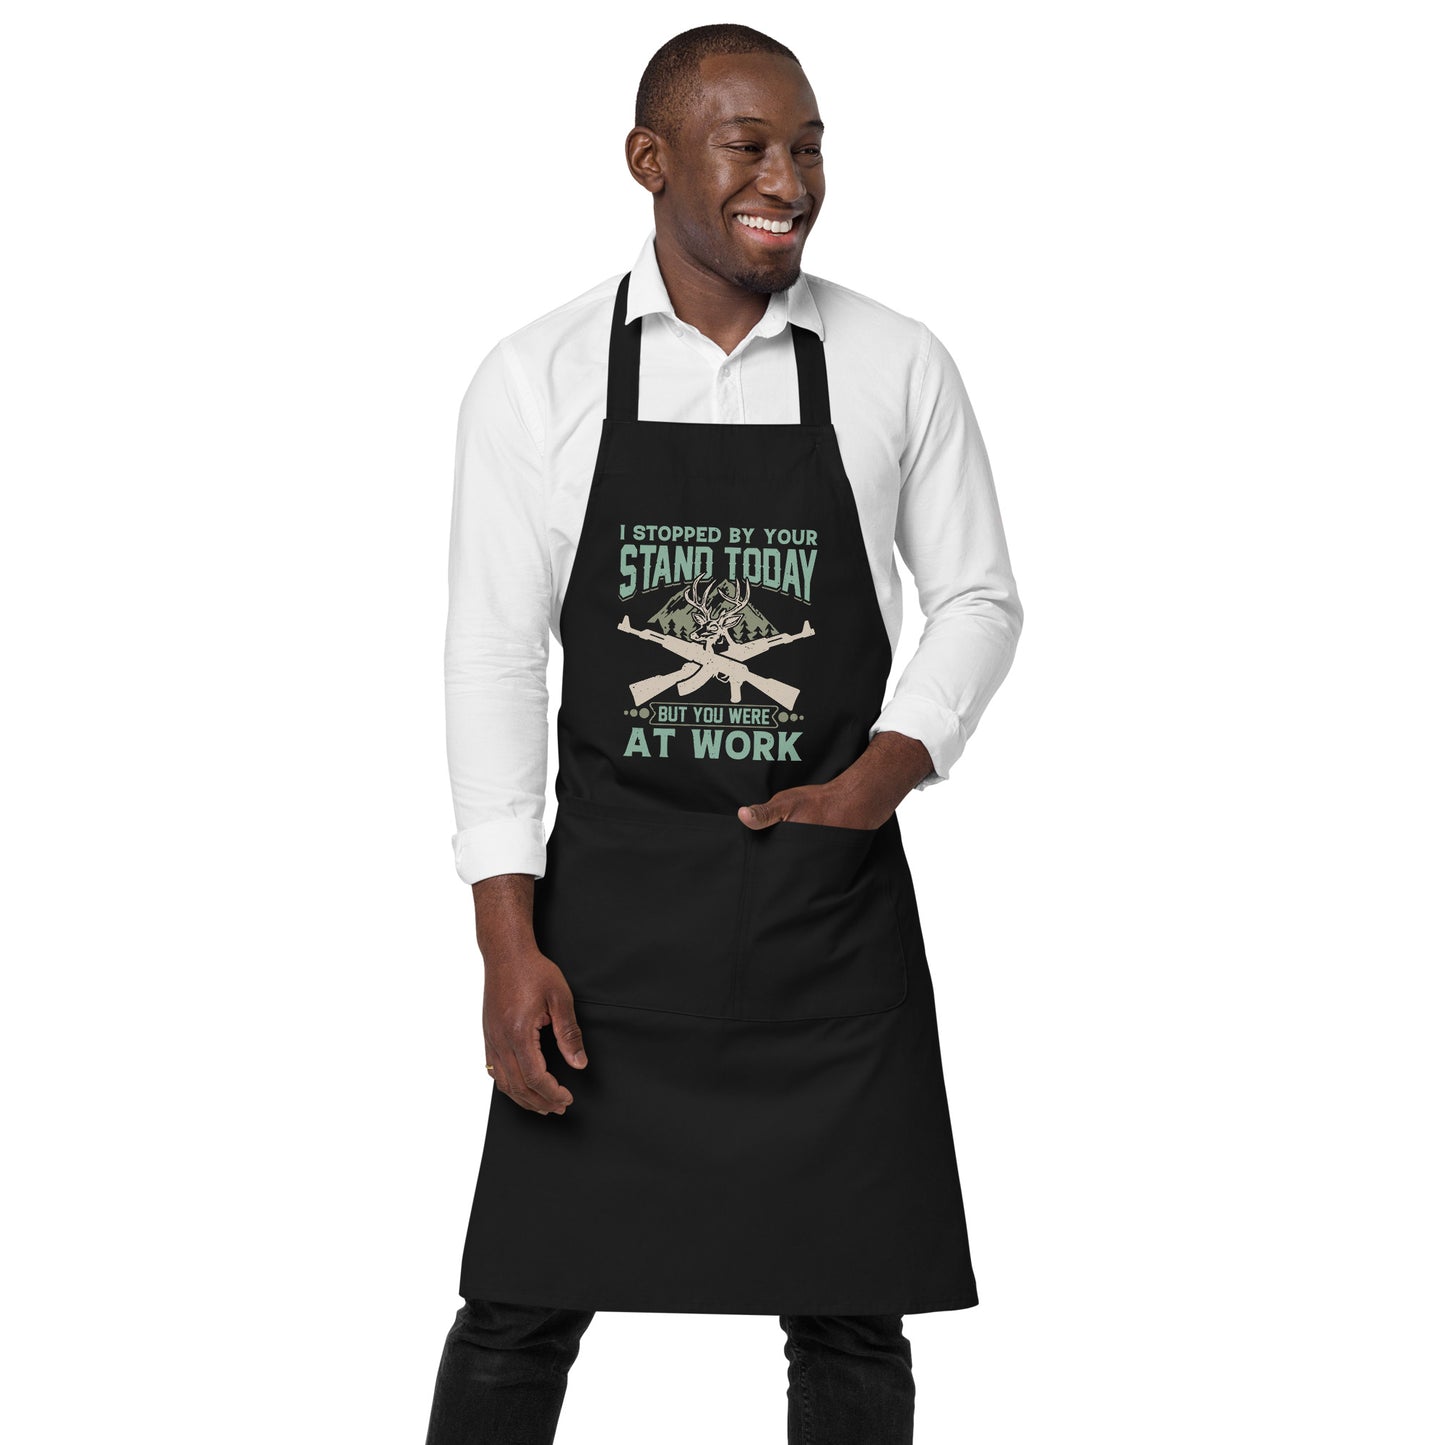 I Stopped by Your Stand Today Organic cotton apron